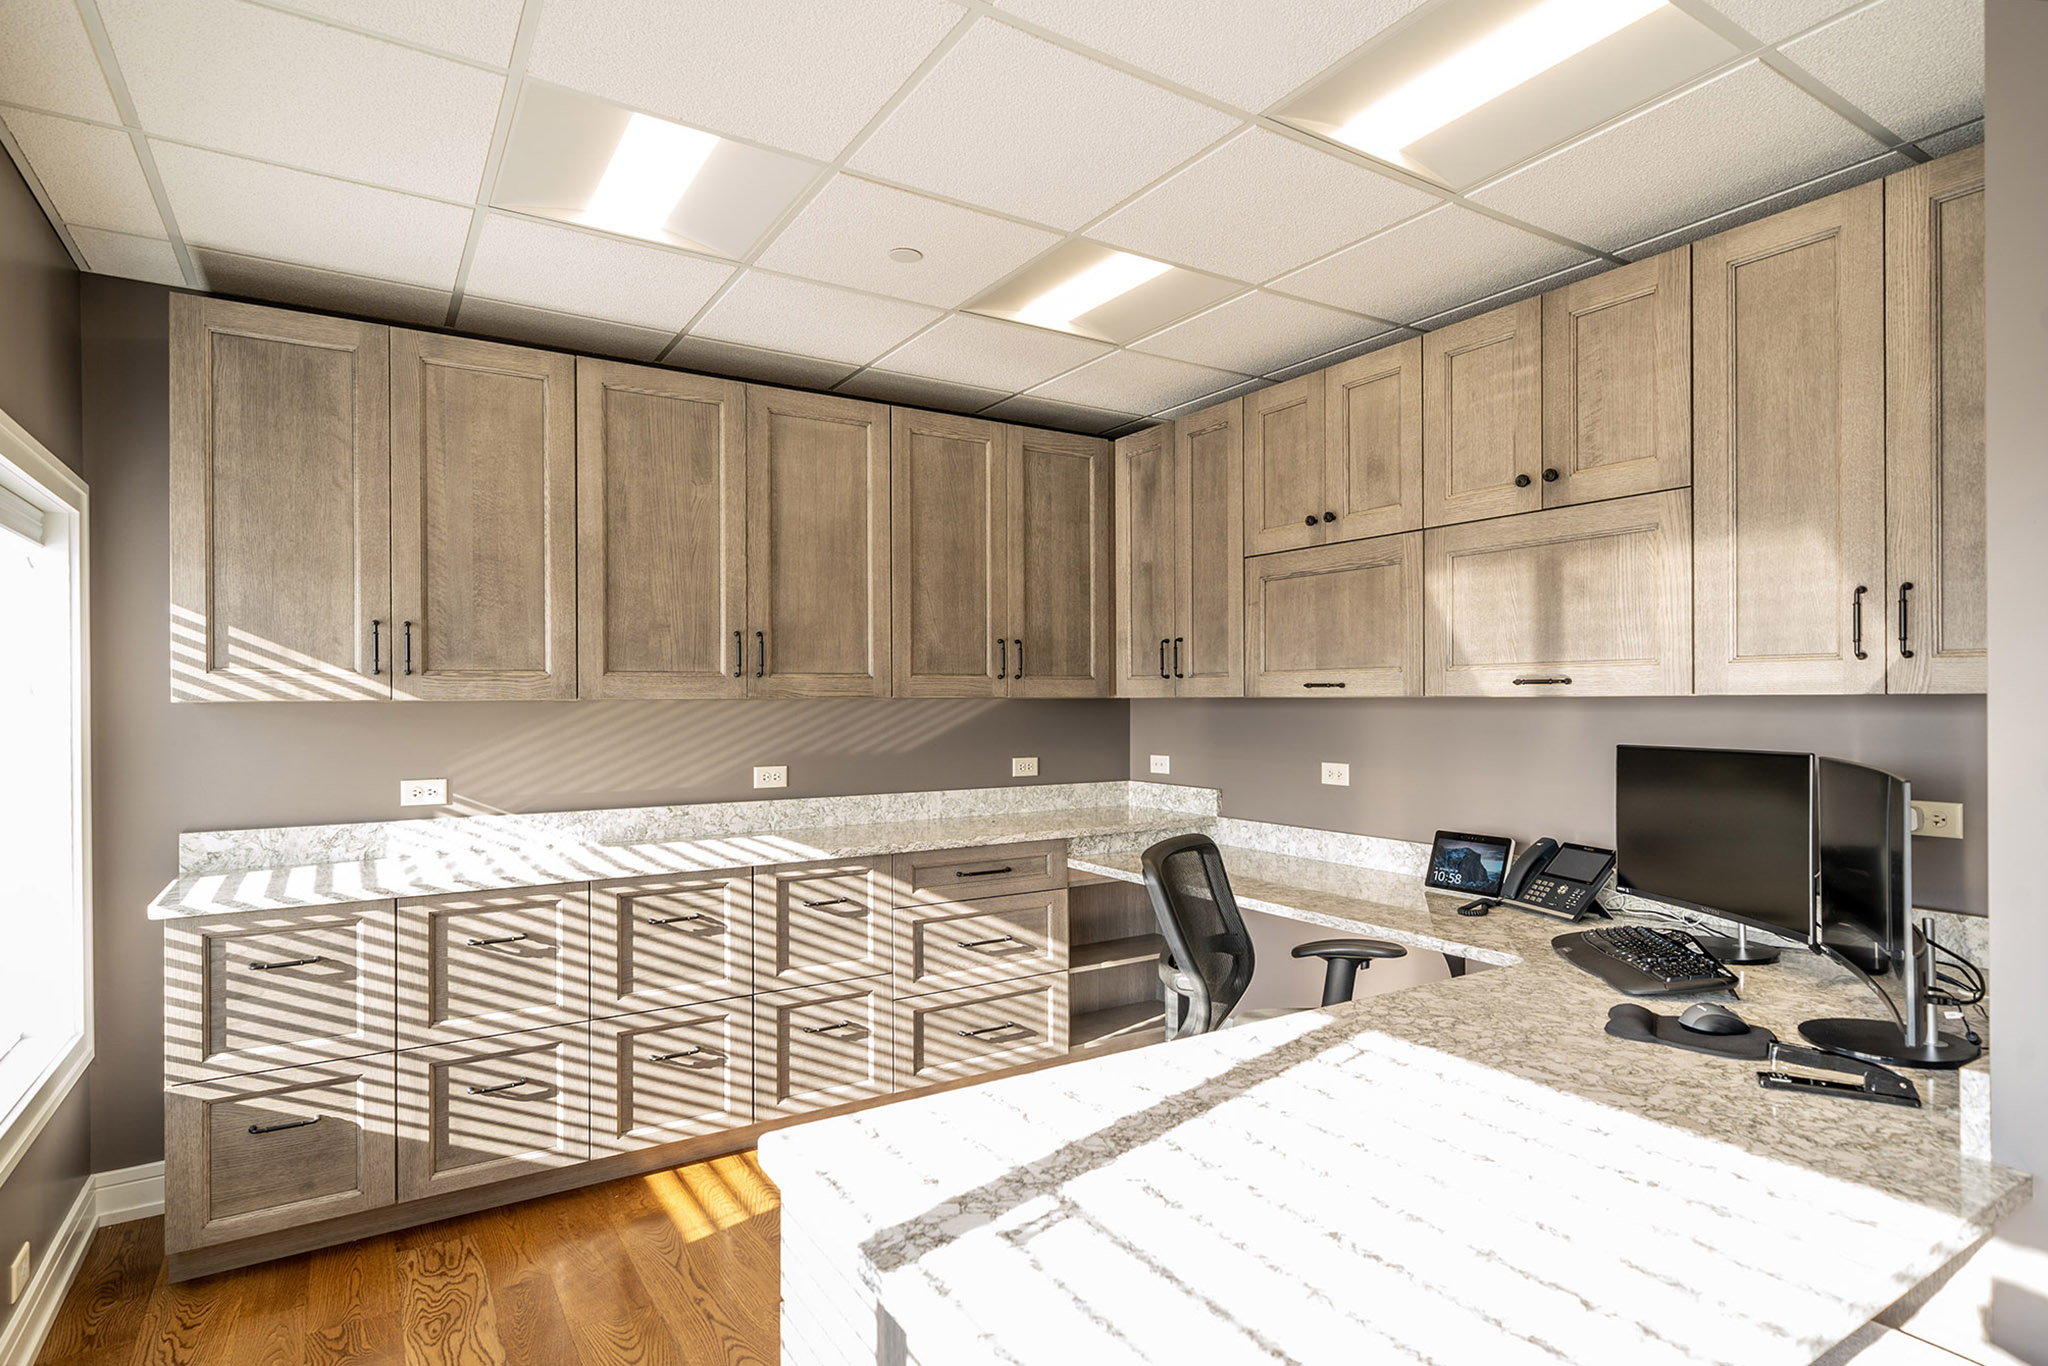 Eclipse Cabinetry